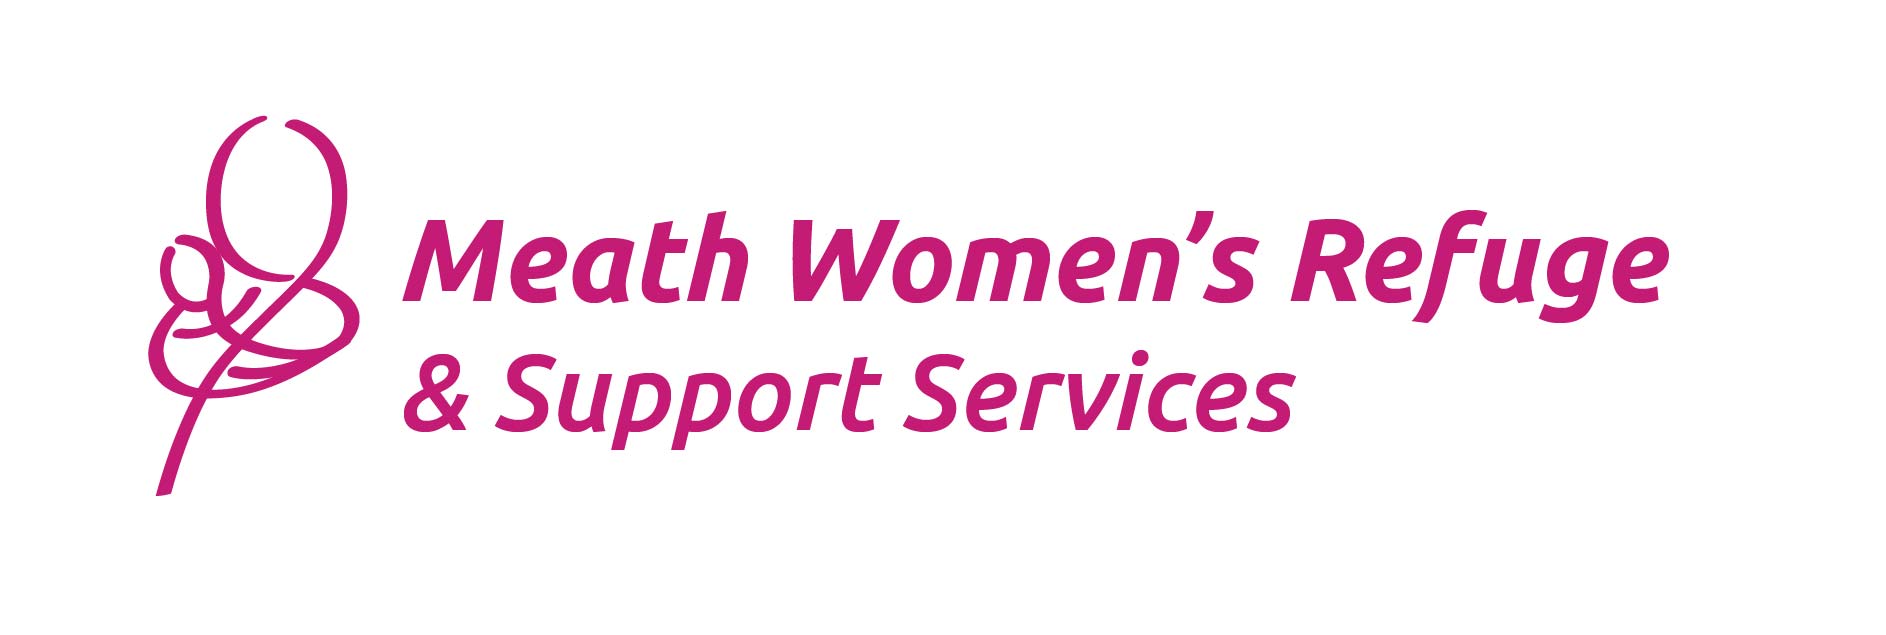 Meath Women’s Refuge and Support Services